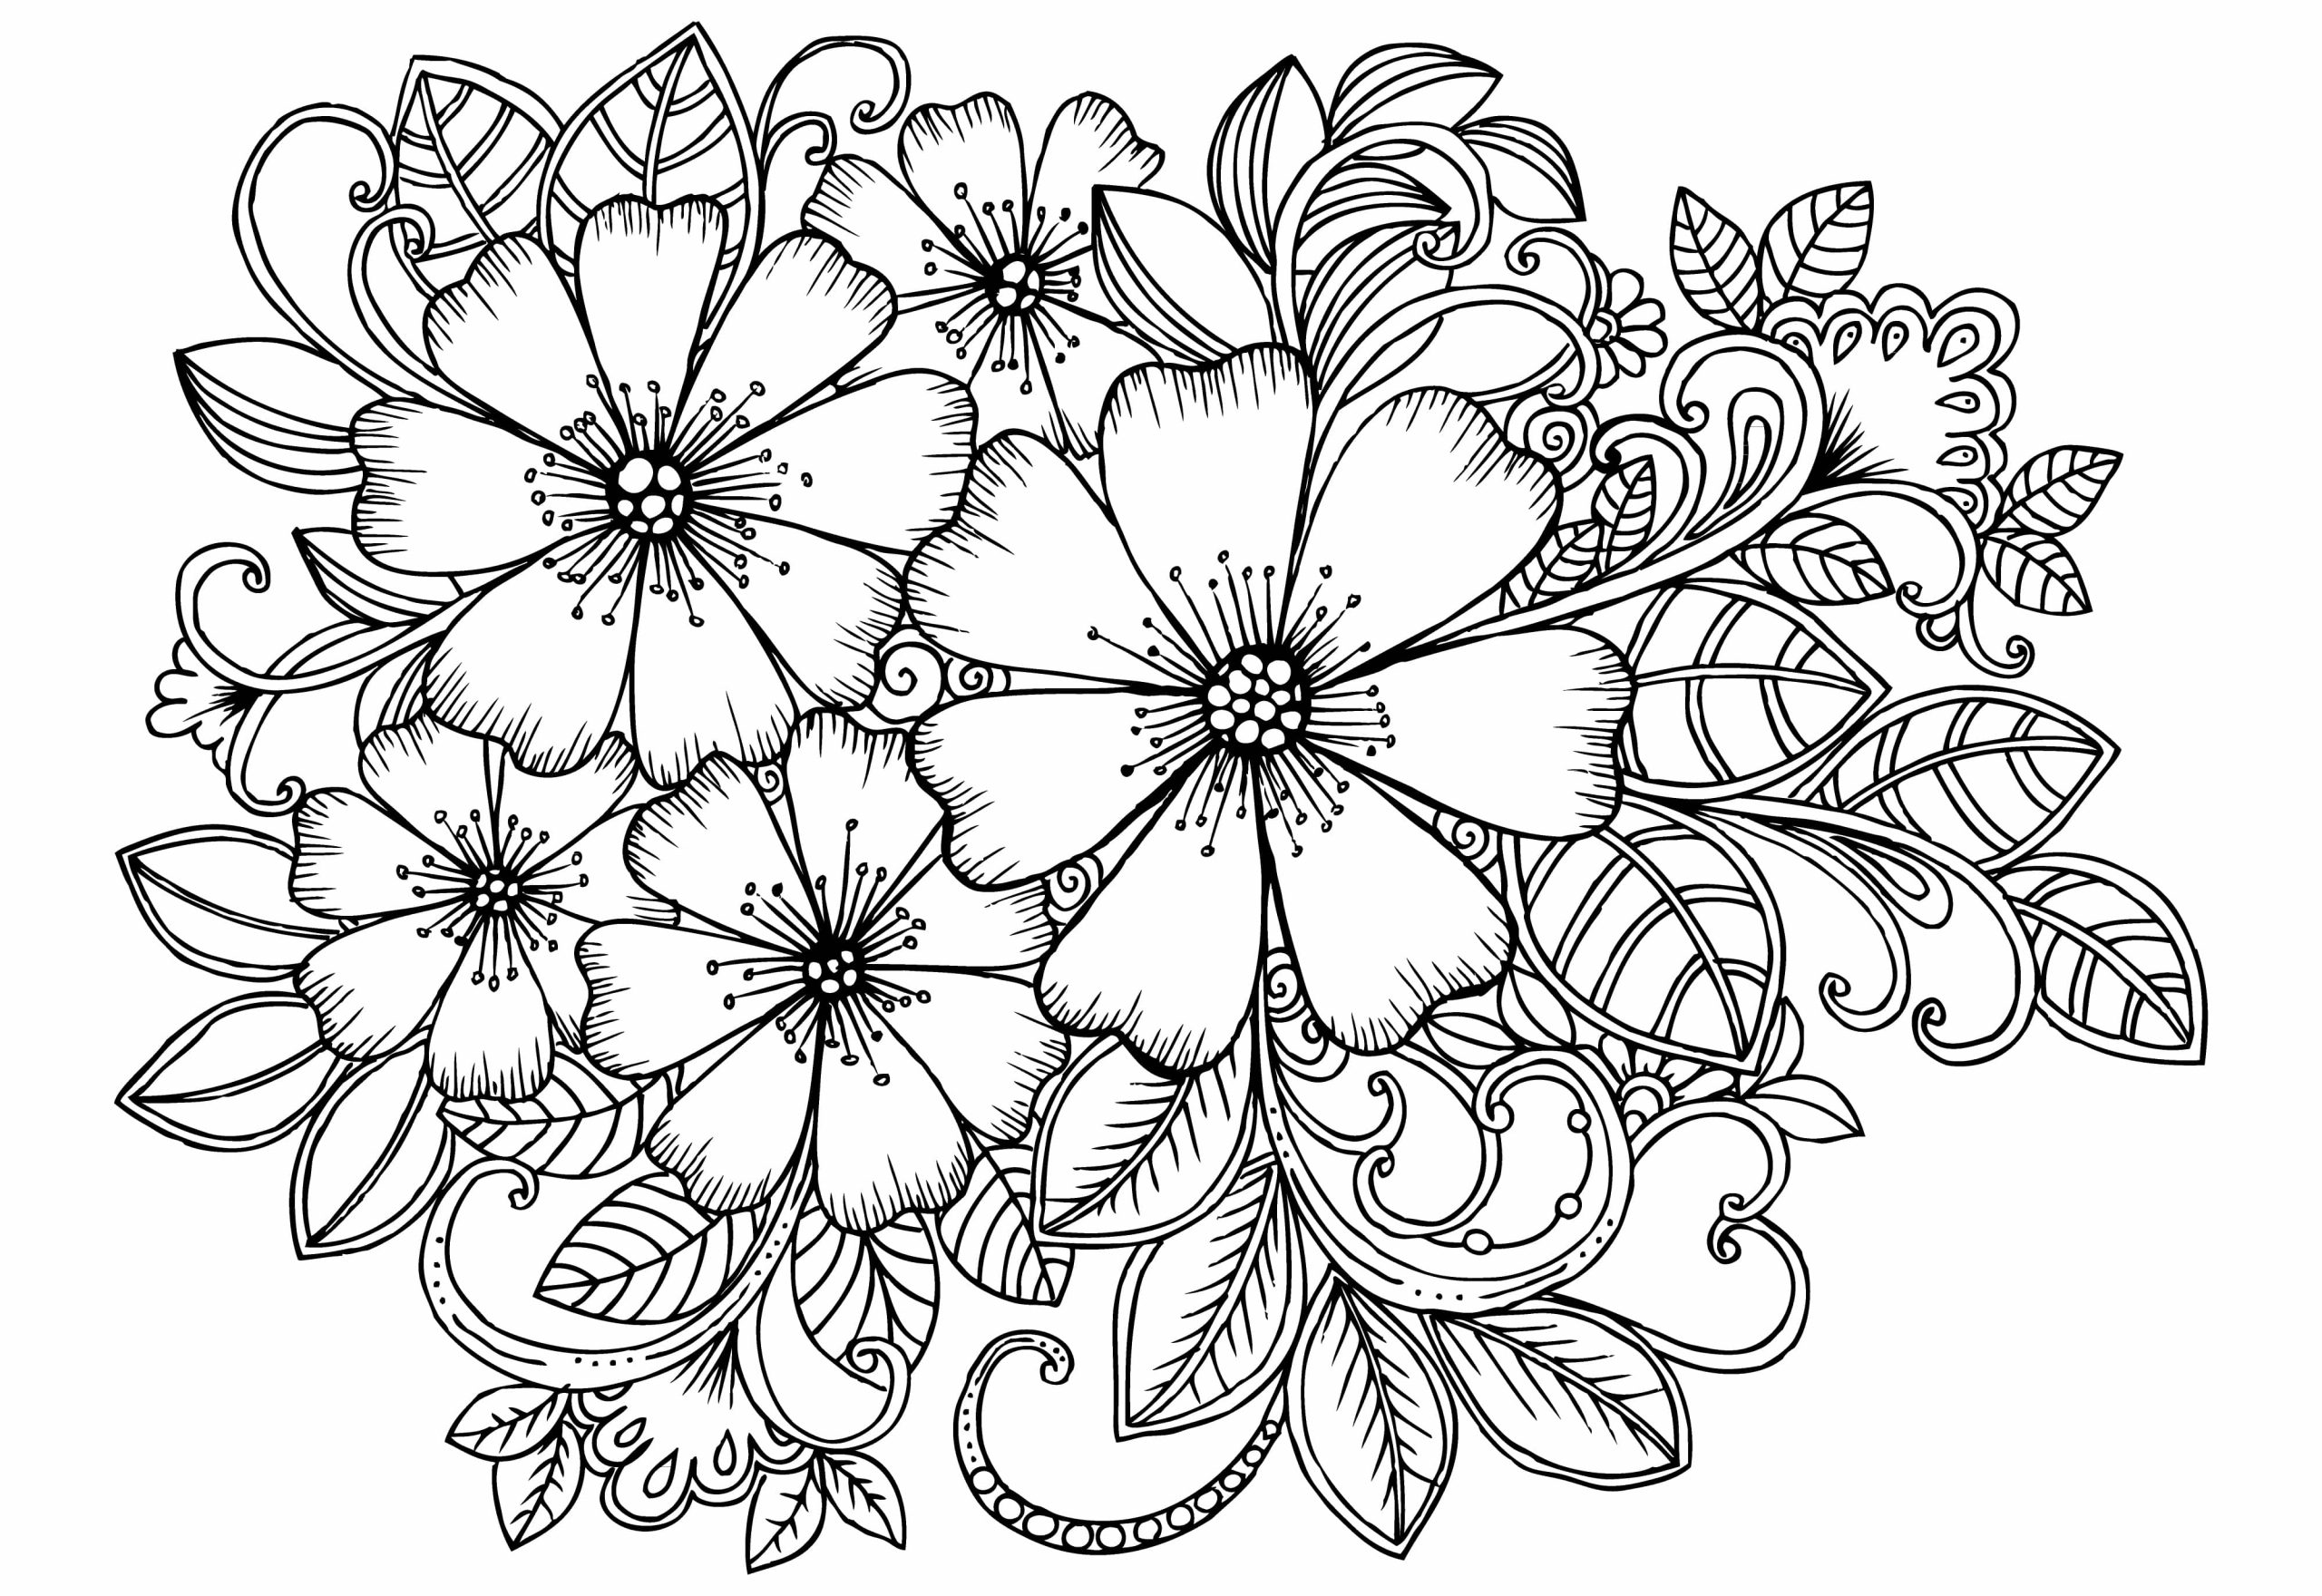 Drawing flowers